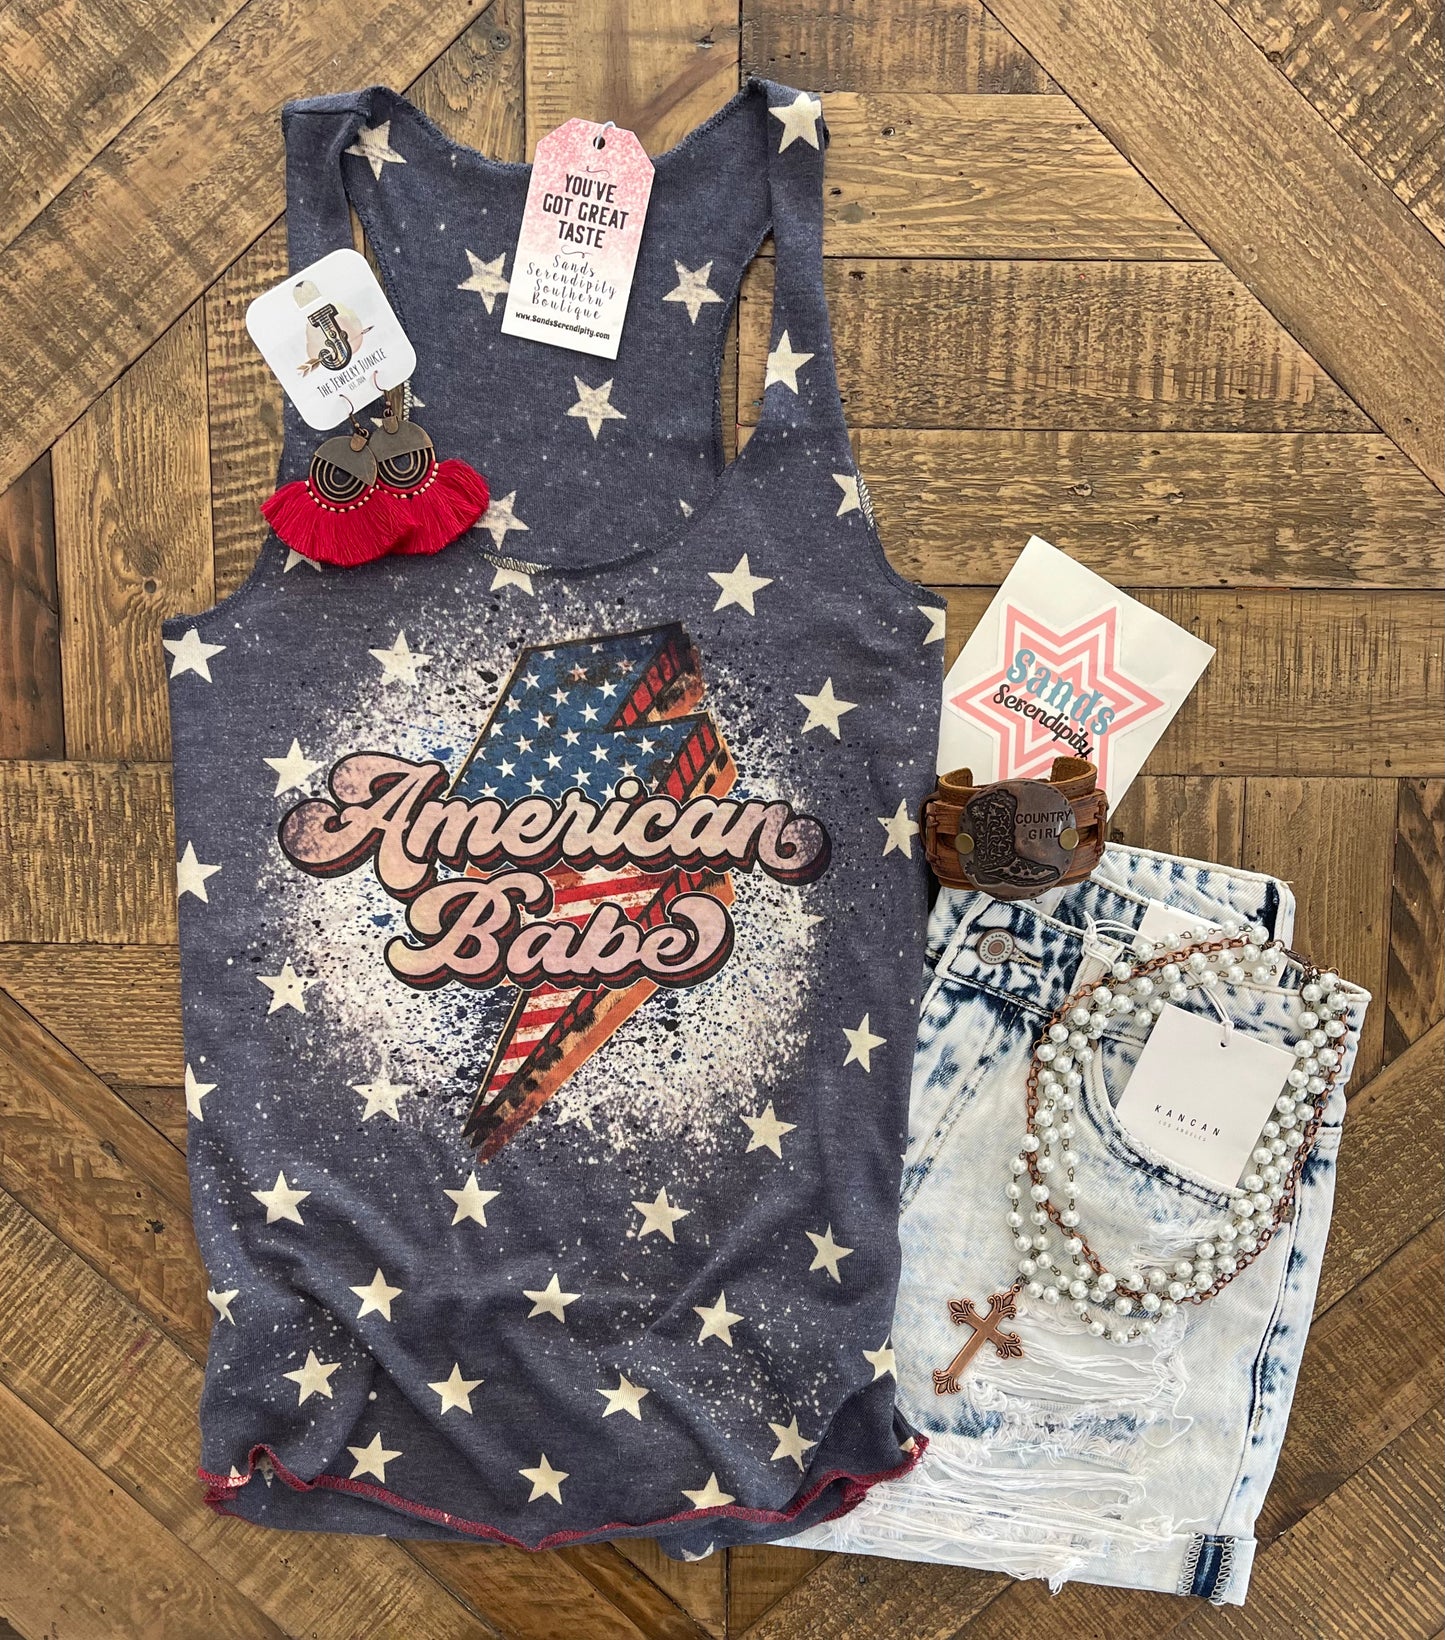 🇺🇸American Babe 🇺🇸 - Sands Serendipity Boutique